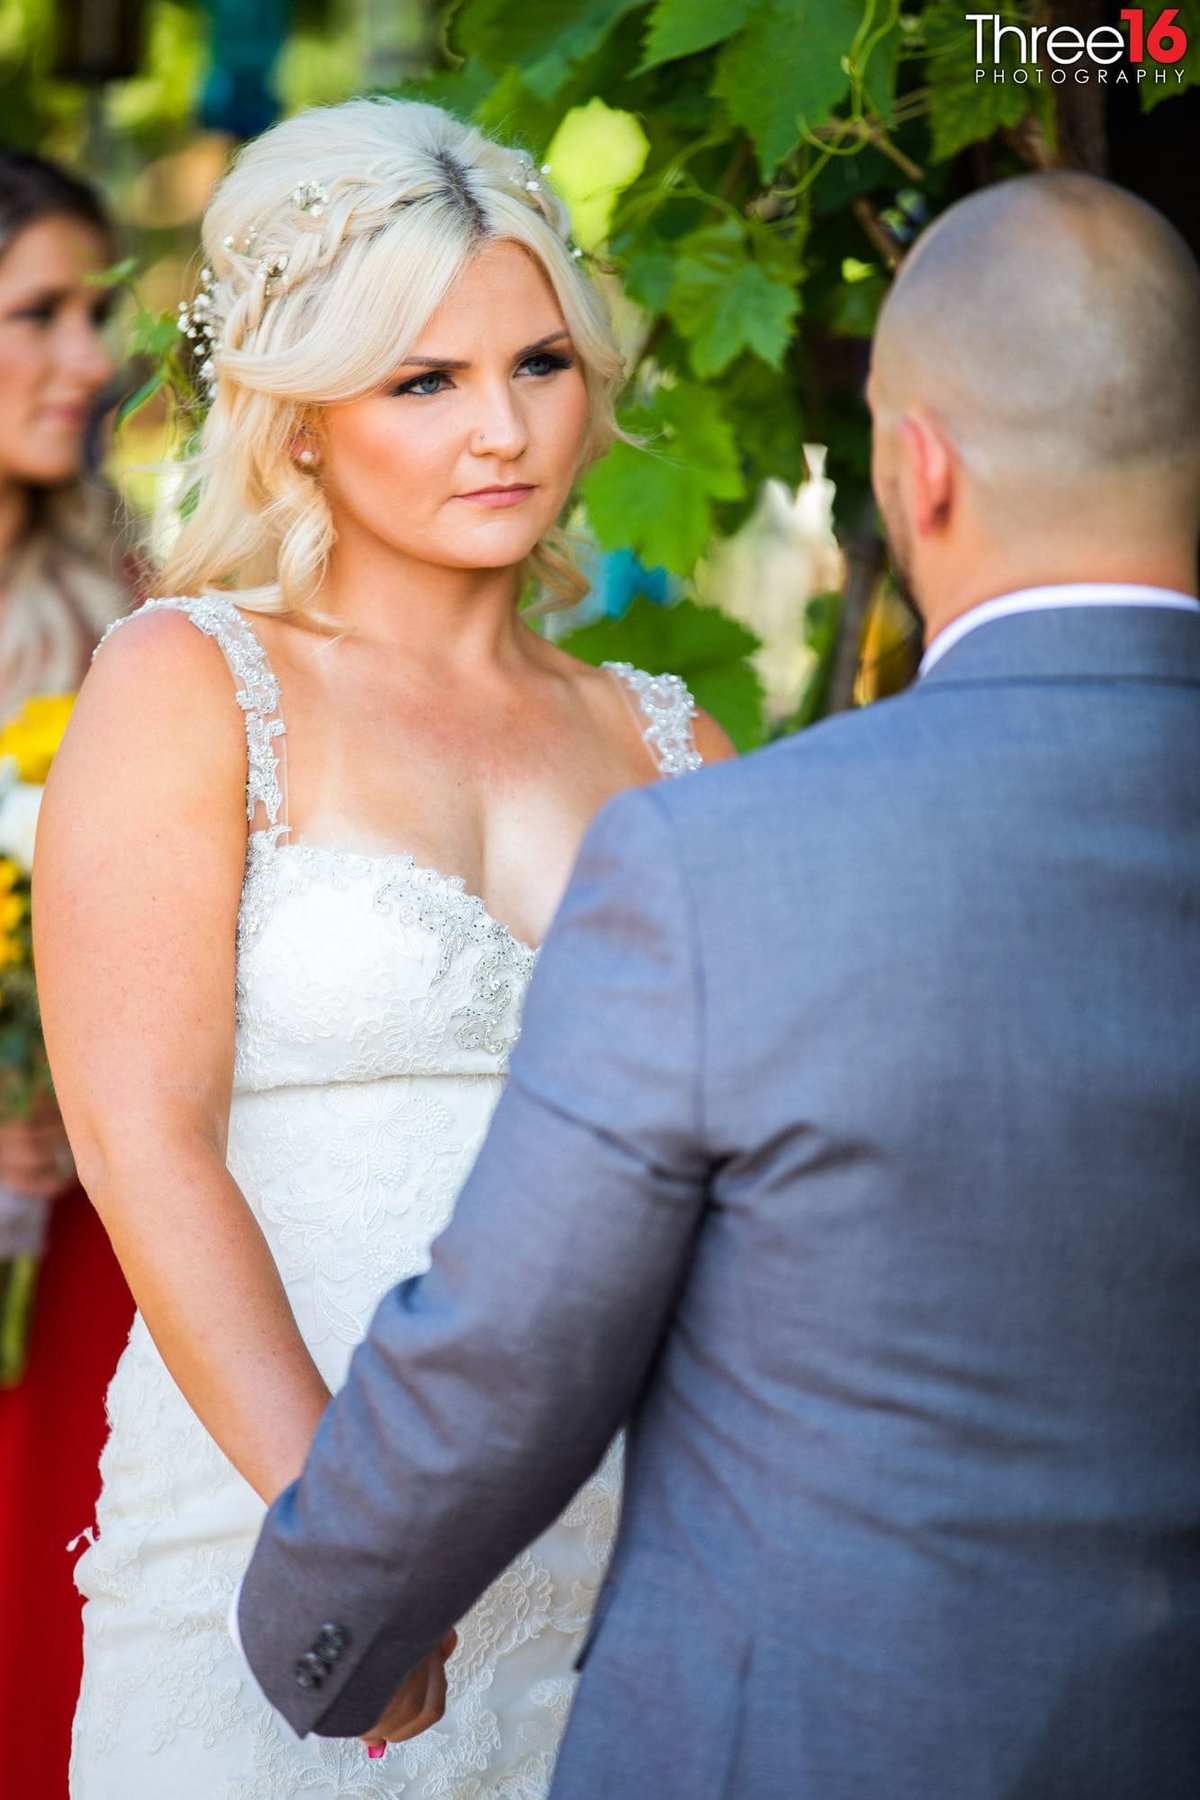 Bride staring at her Groom during wedding ceremony